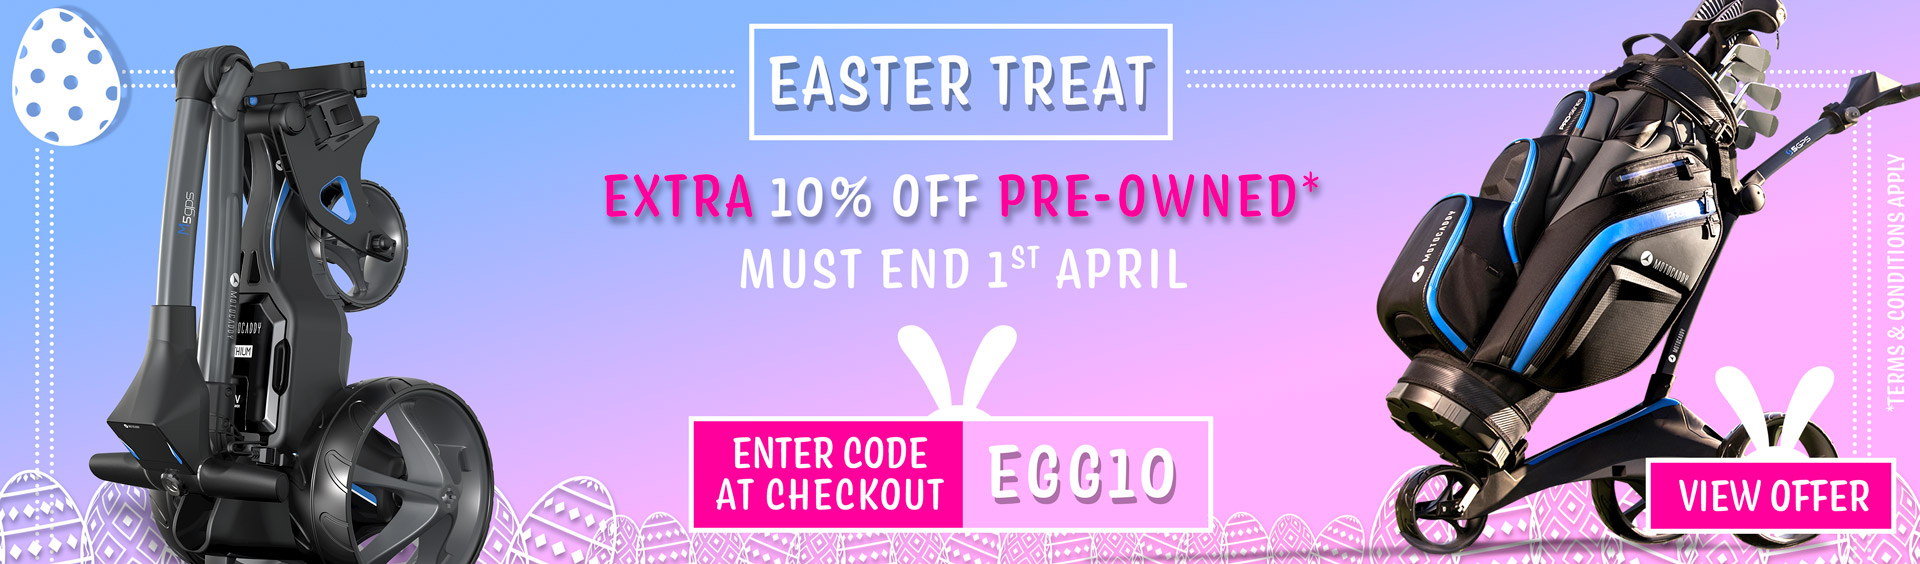  EASTER TREAT - Extra 10% off Pre-Owned